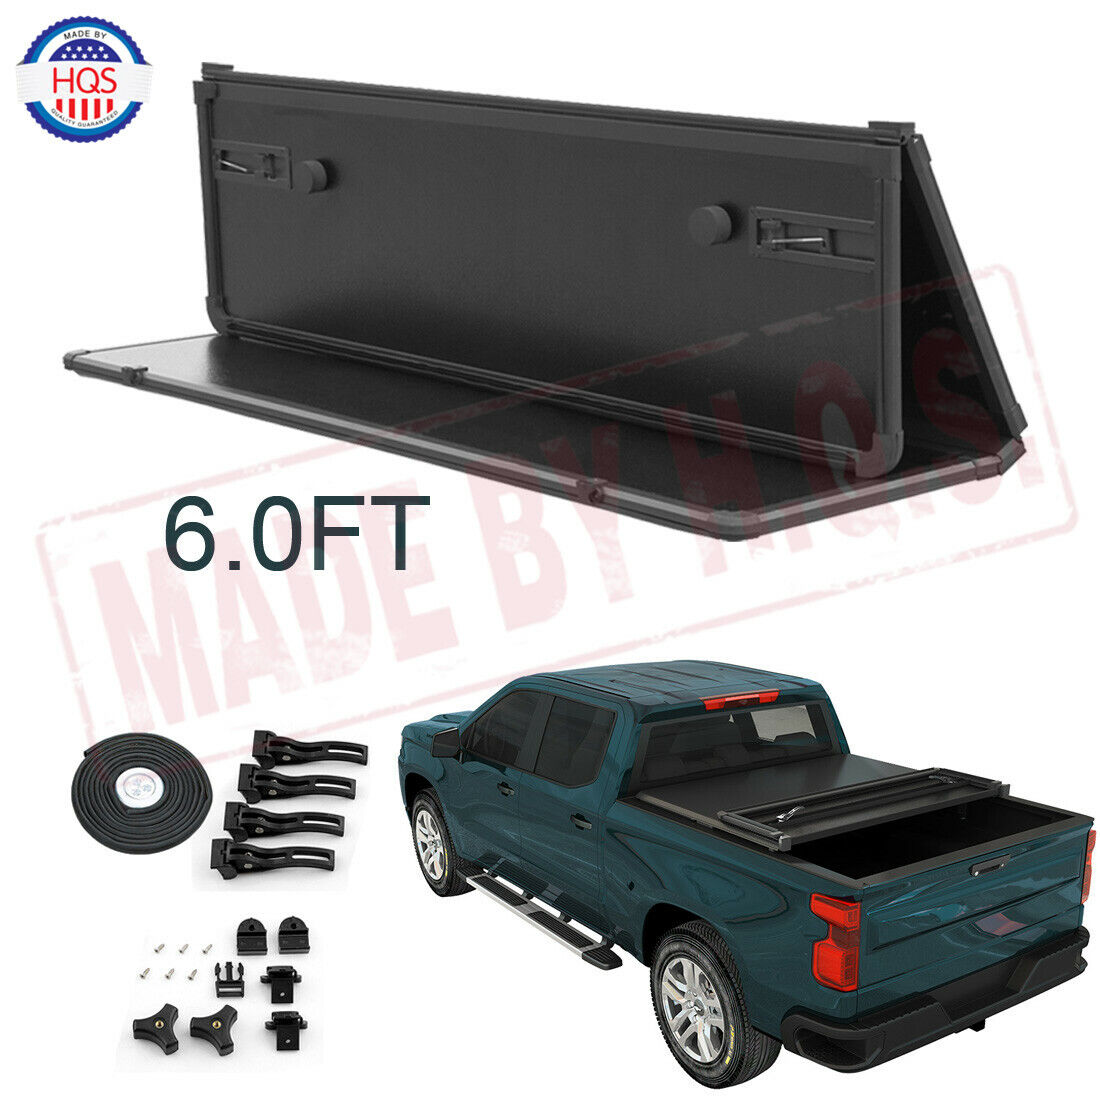 6" Solid Hard Tri-Fold Tonneau Cover For 2005-2018 Toyota Tacoma 6 Ft Short Bed 